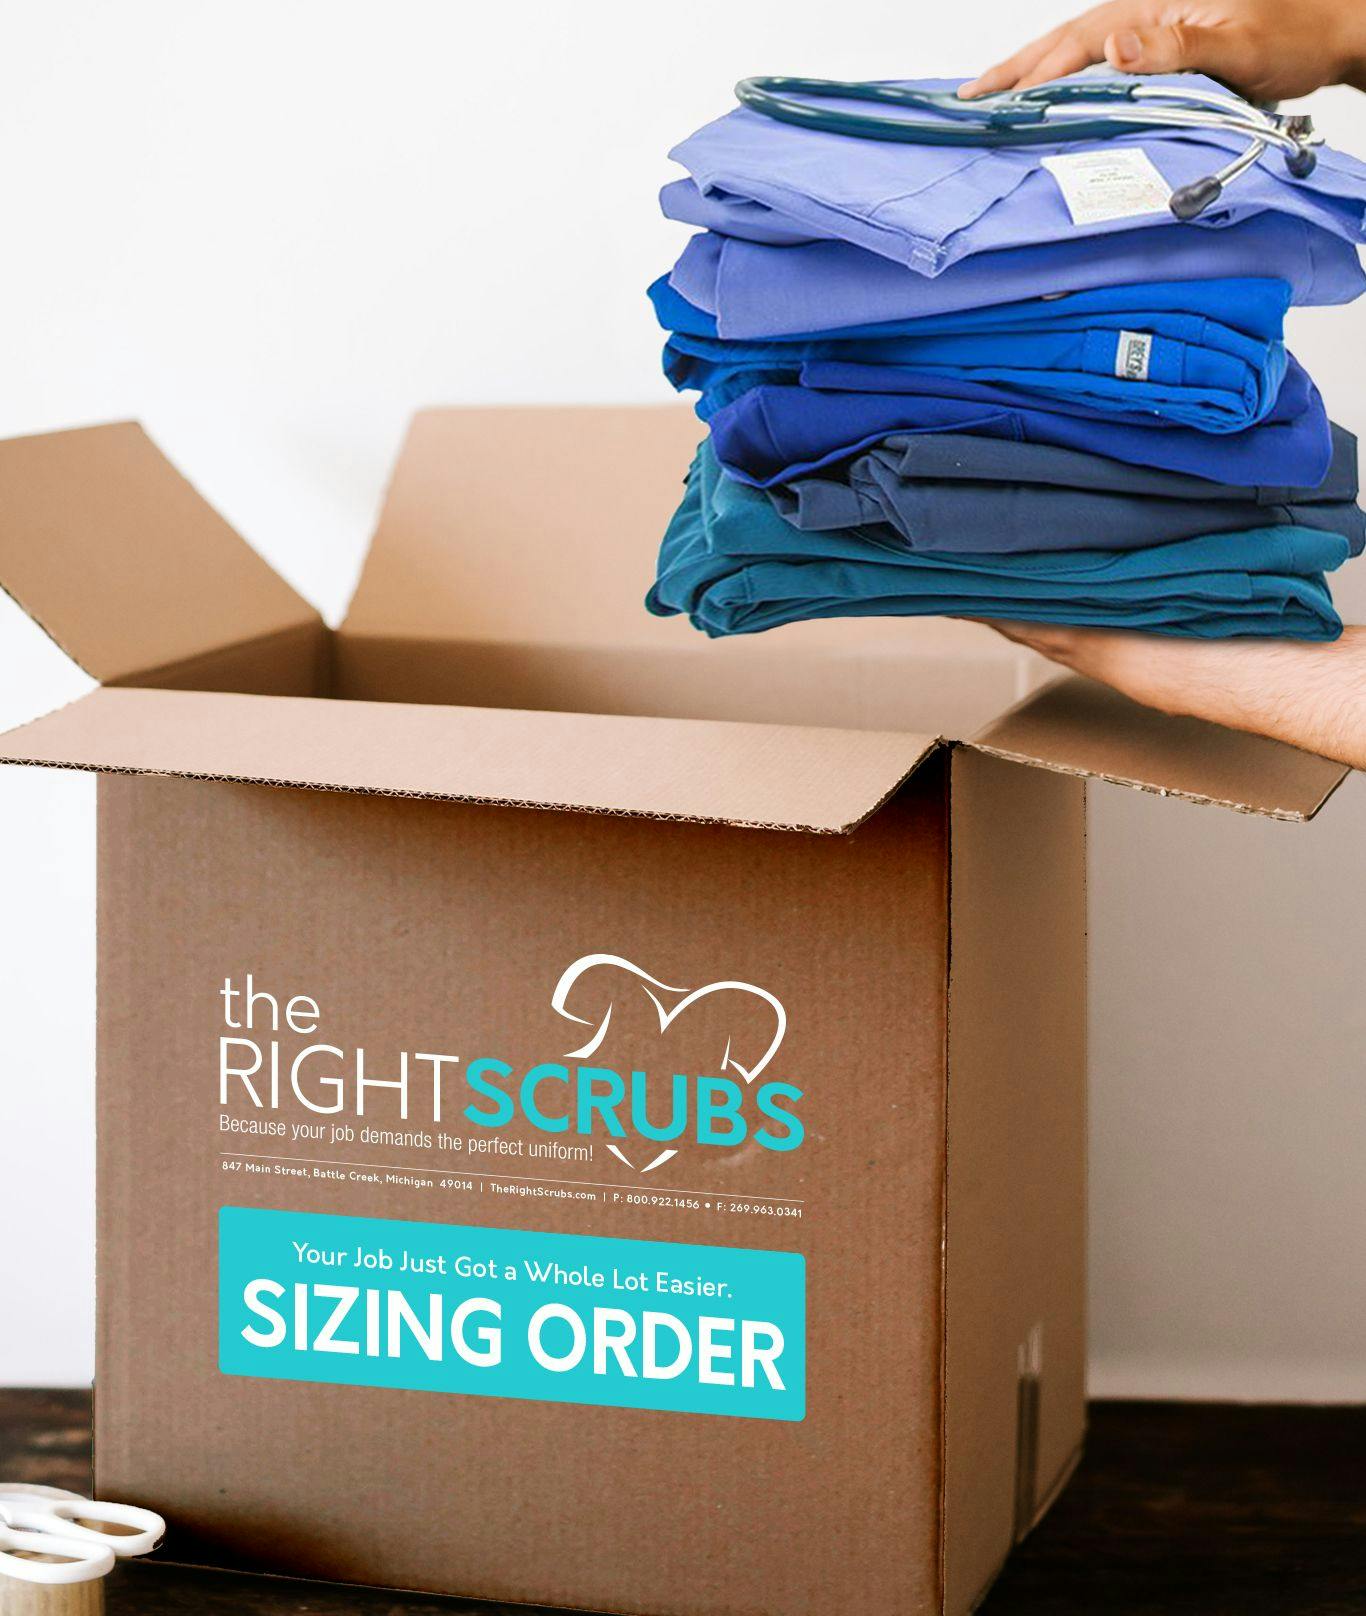 TheRightScrubs-Services-Sizing-Orders